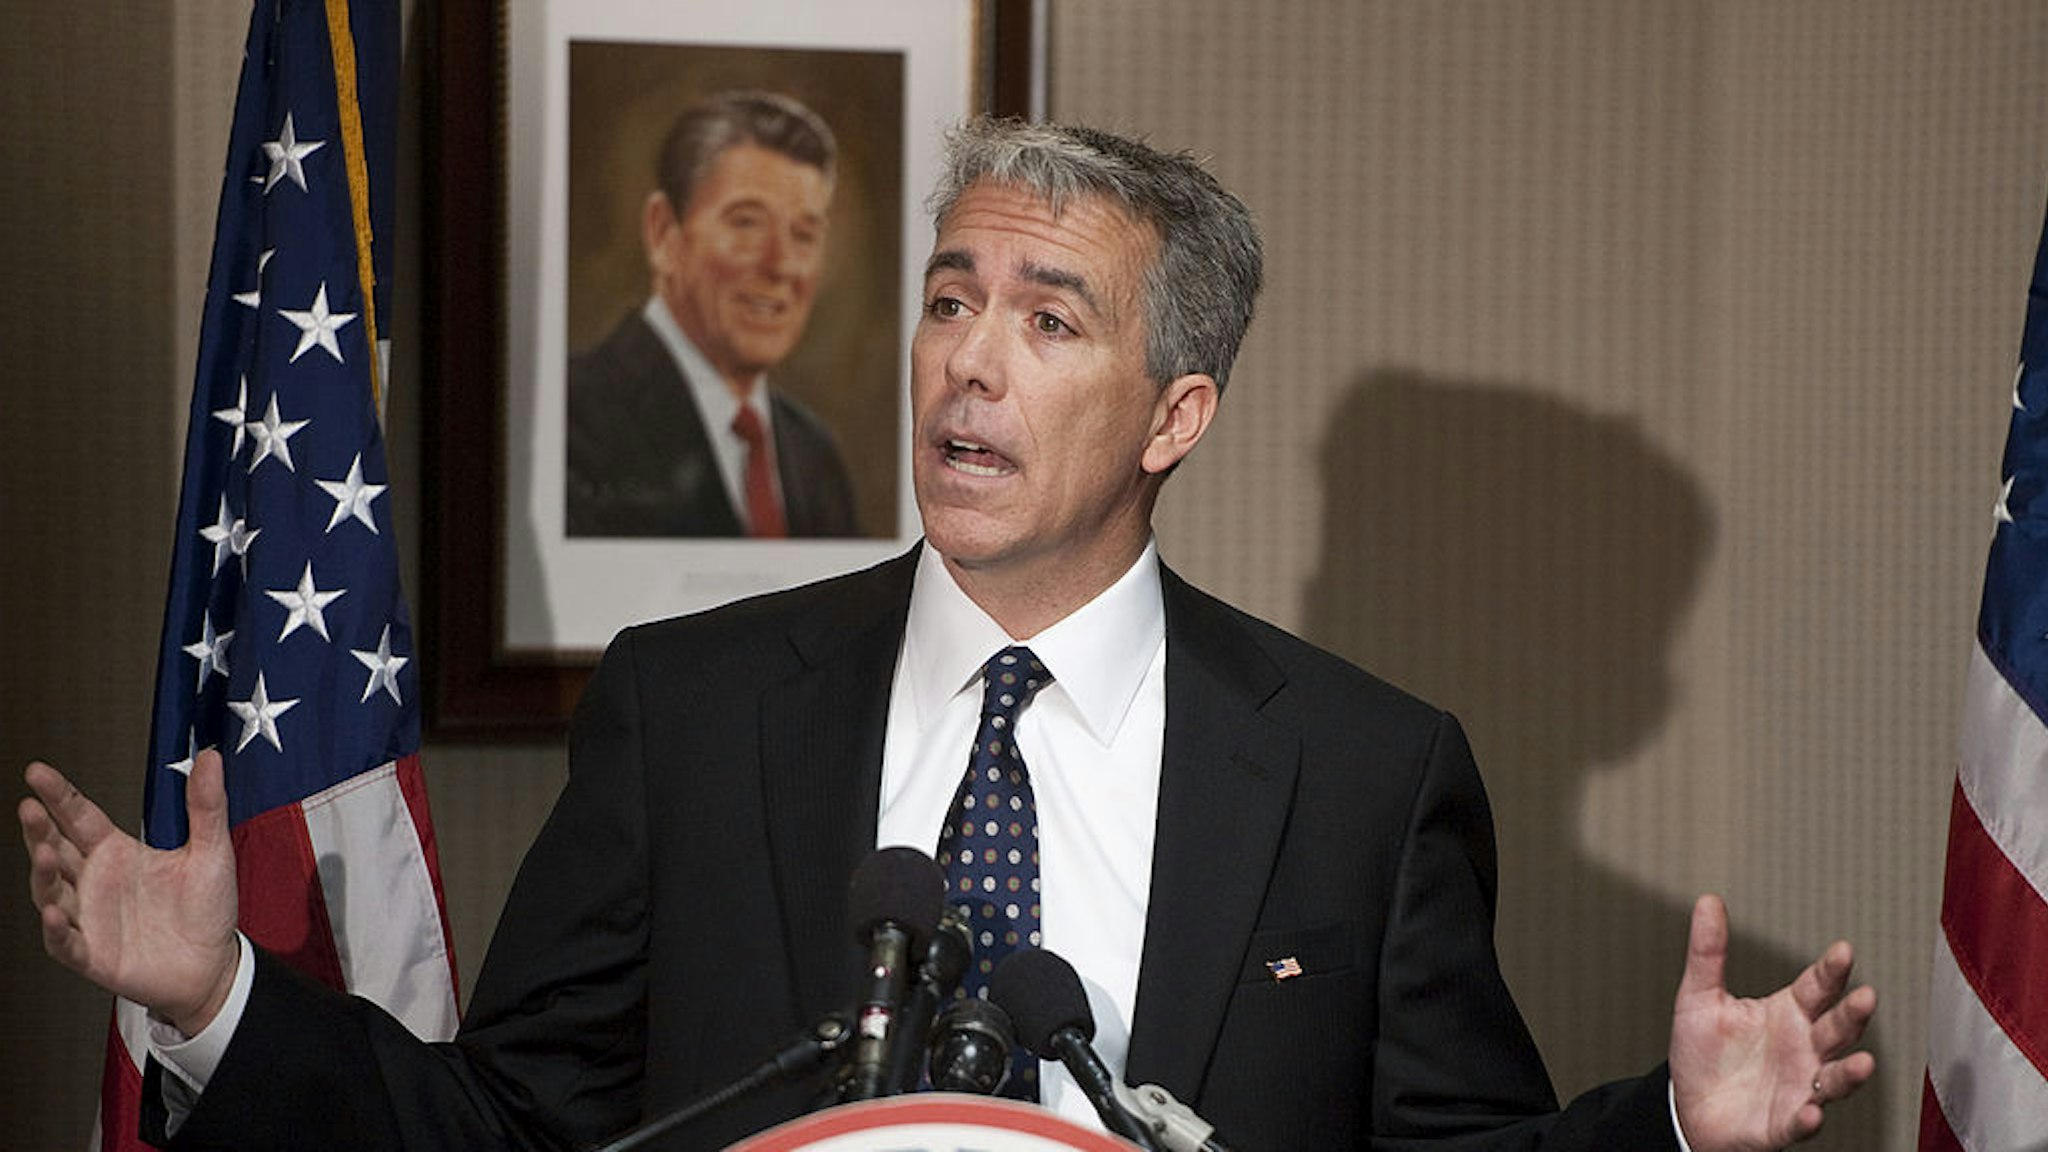 Rep.-elect Joe Walsh, R-Ill., holds a news conference on his election to Congress at the Republican National Committee headquarters on Wednesday, Nov. 17, 2010. (Photo By Bill Clark/Roll Call)